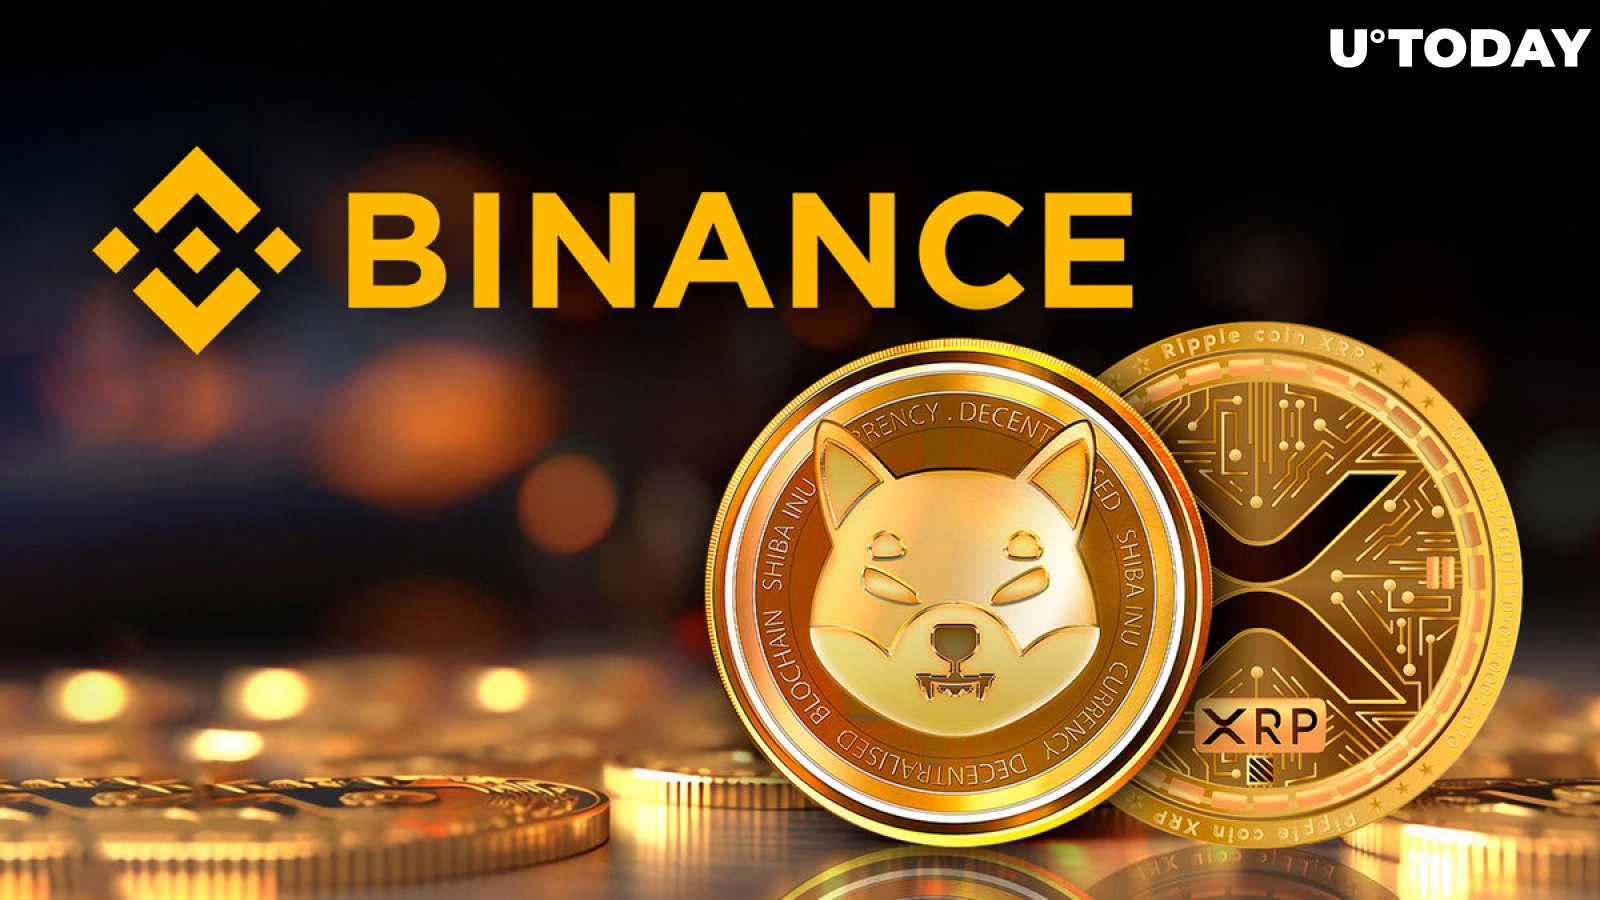 SHIB, XRP Holders Should Pay Attention to This Binance Announcement